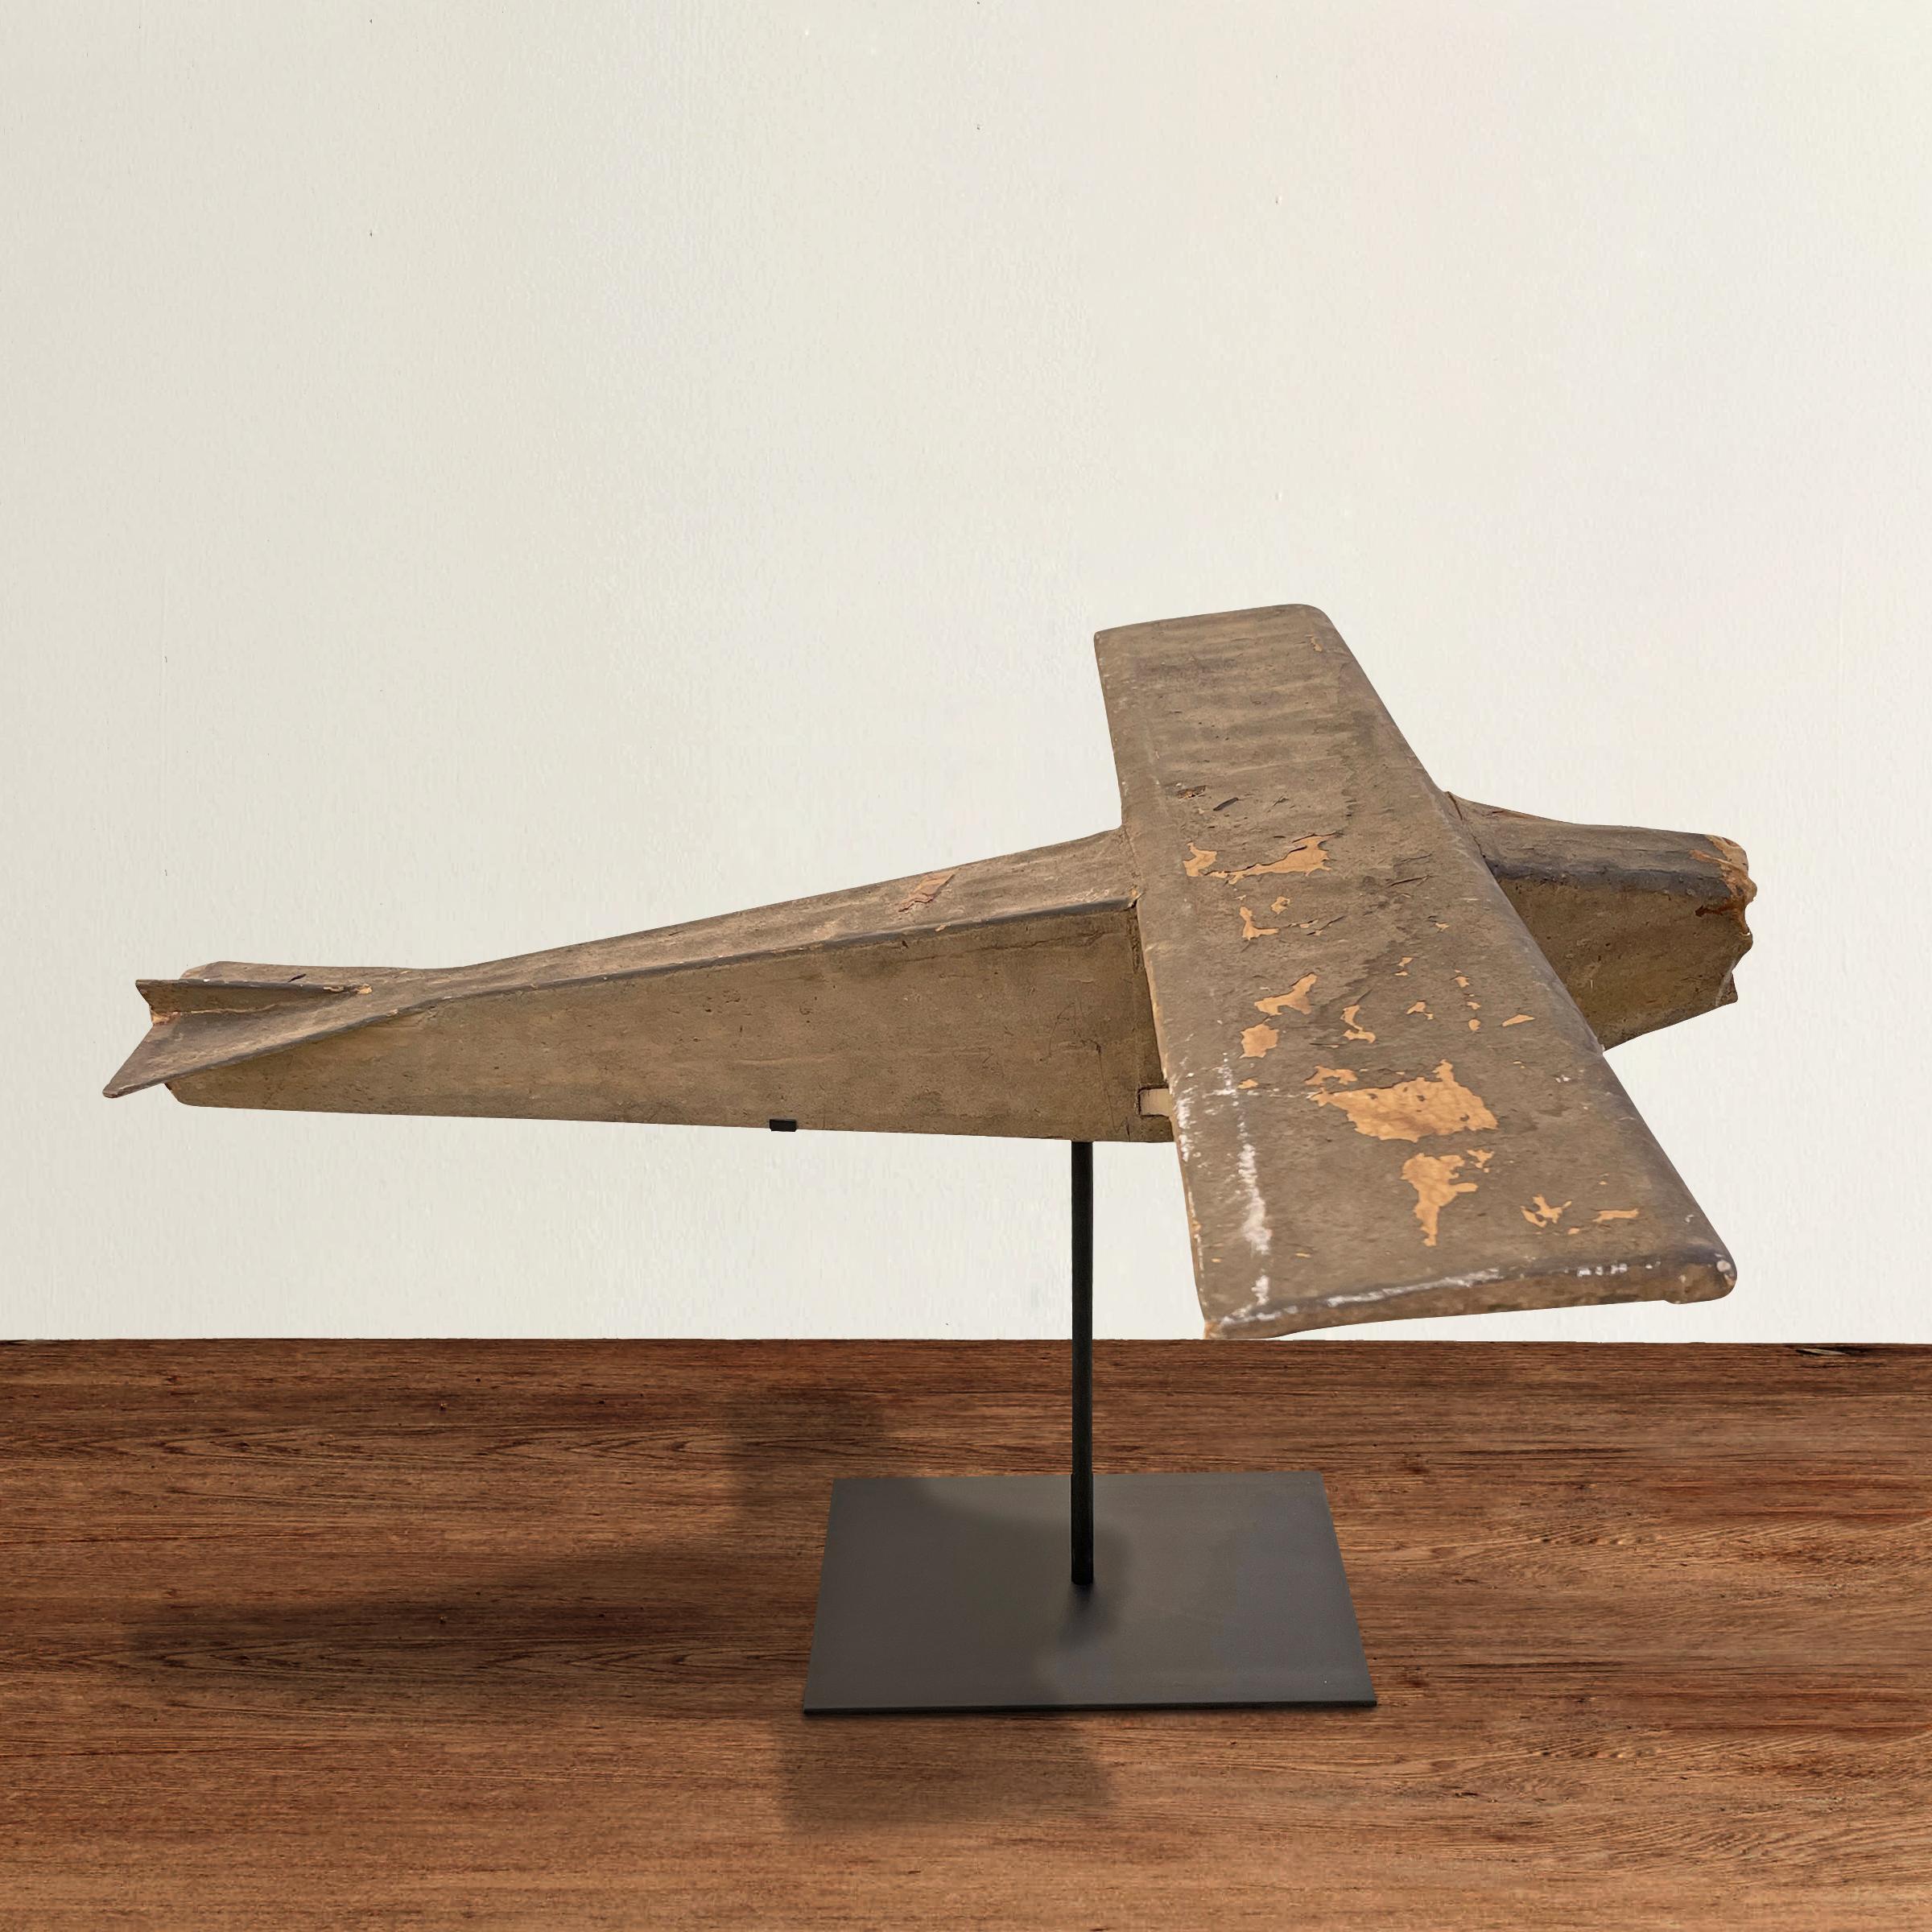 A wonderful and charming early 20th century American bush plane model constructed with painted canvas stretched over a wooden skeleton, and mounted on a custom steel mount.